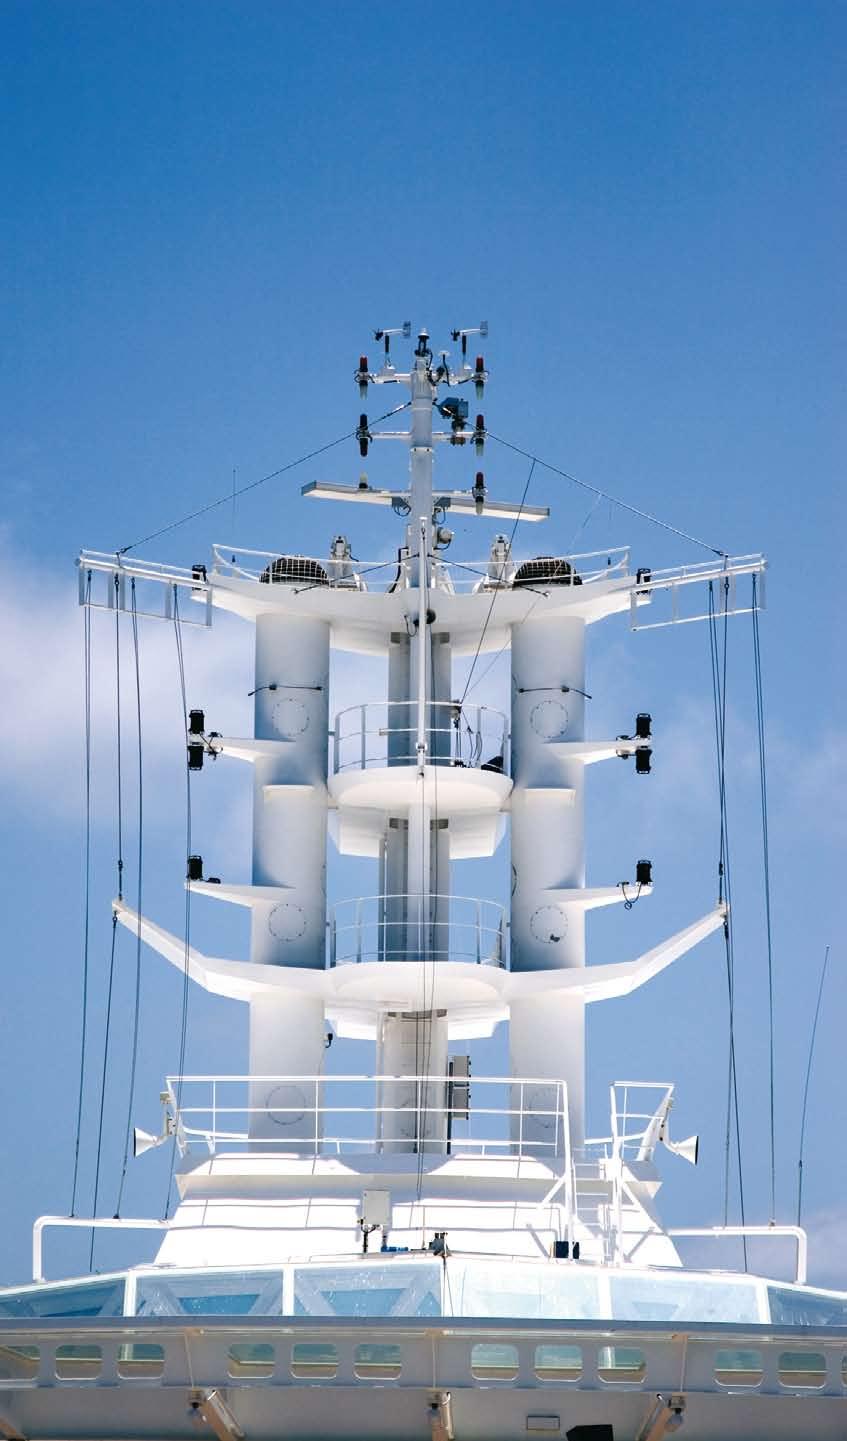 IEC TECHNICAL COMMITTEE 80: MARITIME NAVIGATION AND RADIOCOMMUNICATION EQUIPMENT AND SYSTEMS One of the fundamental trends in the maritime industry over the past decades has been an increasing